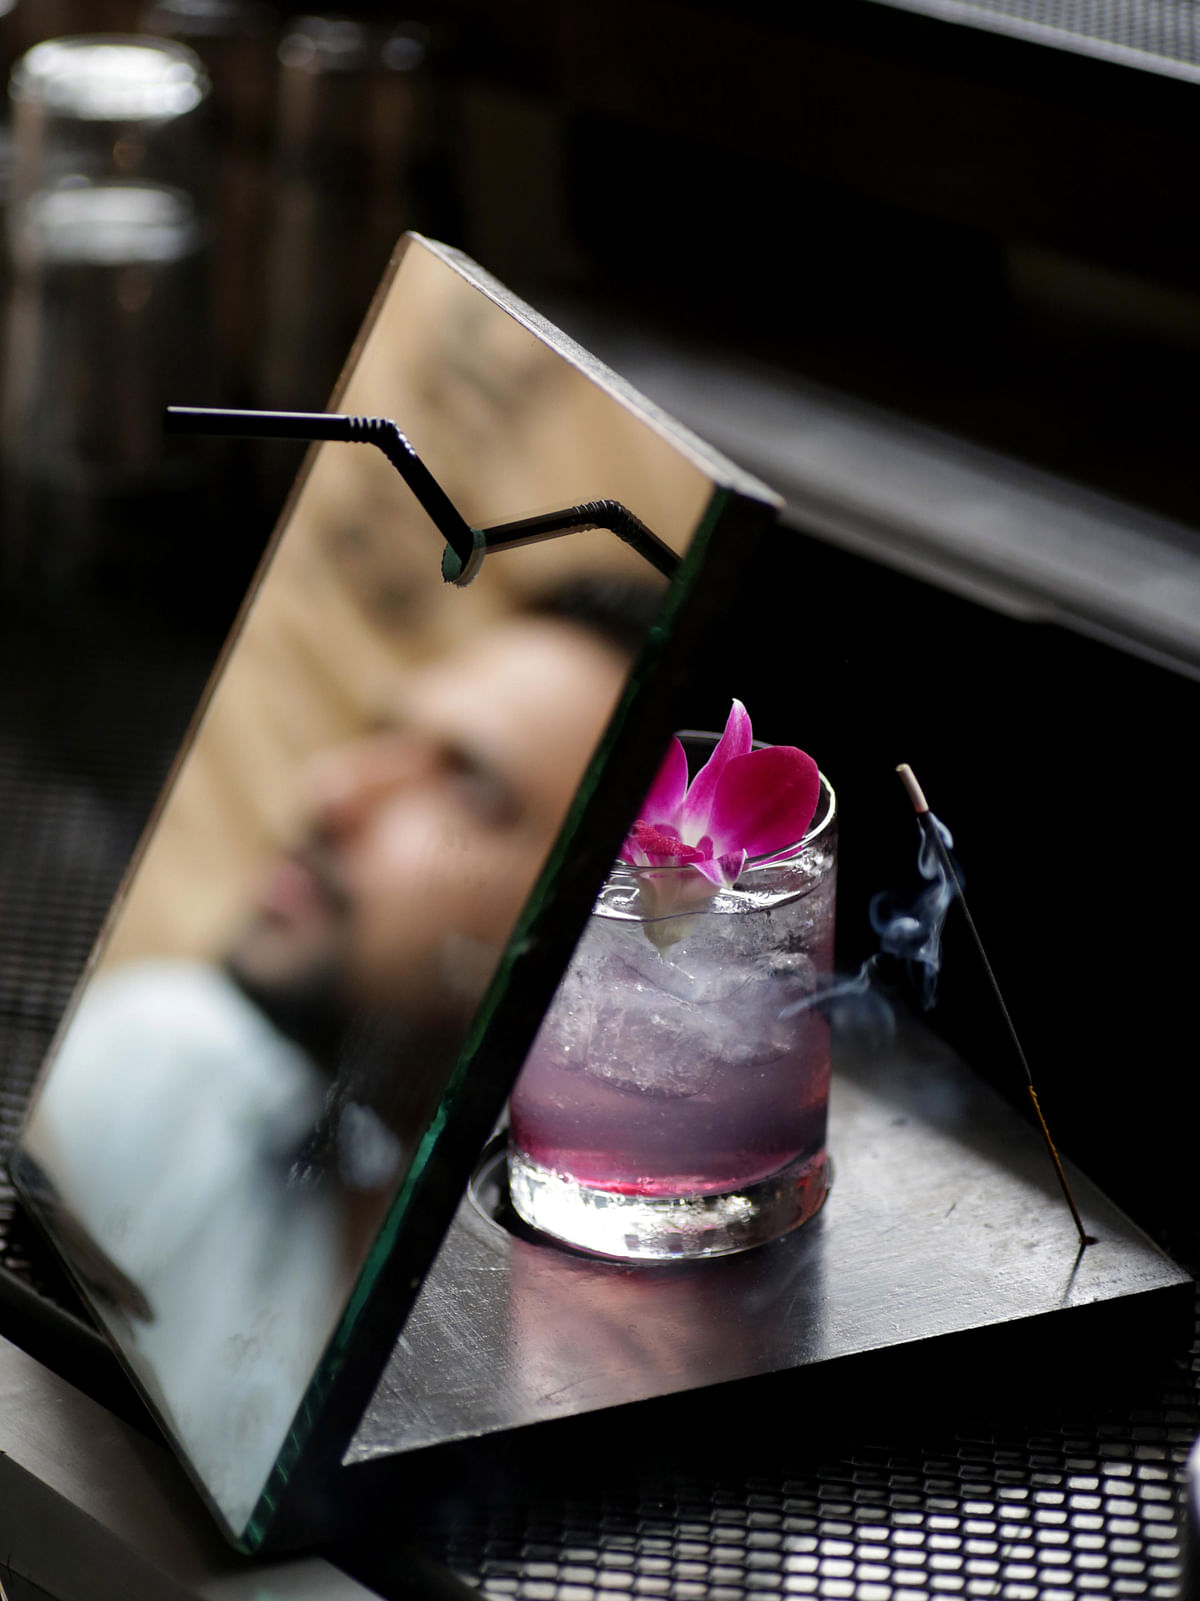 Move aside average Martini, classic Cosmopolitan — have you tried these incredible molecular cocktails?